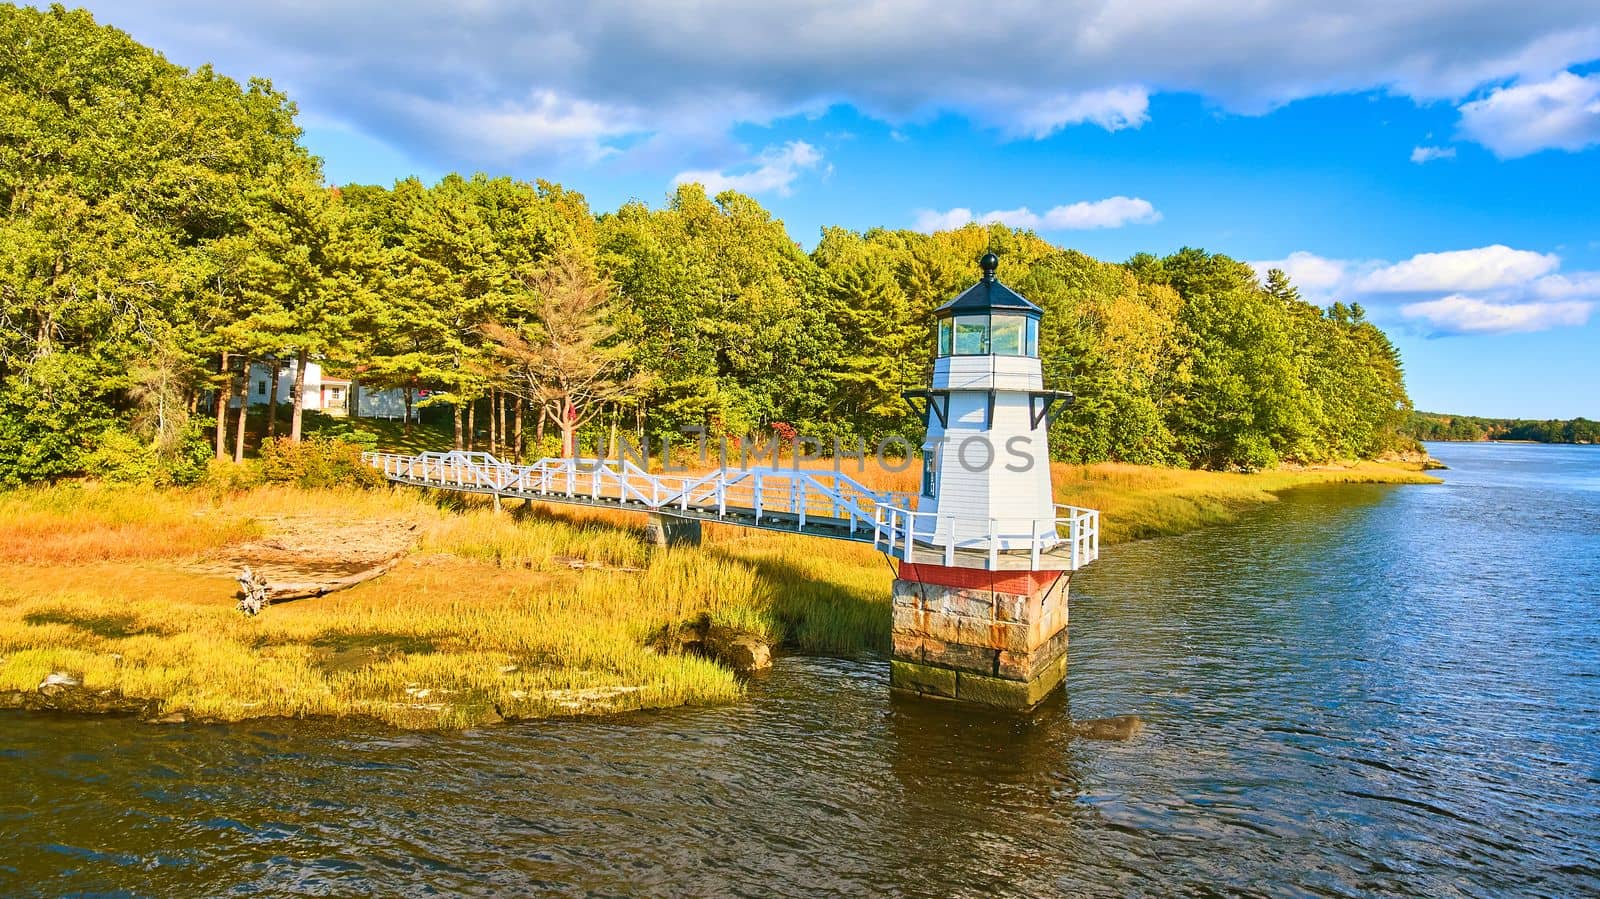 Fall foliage on coast with small lighthouse in Maine and walkway by njproductions